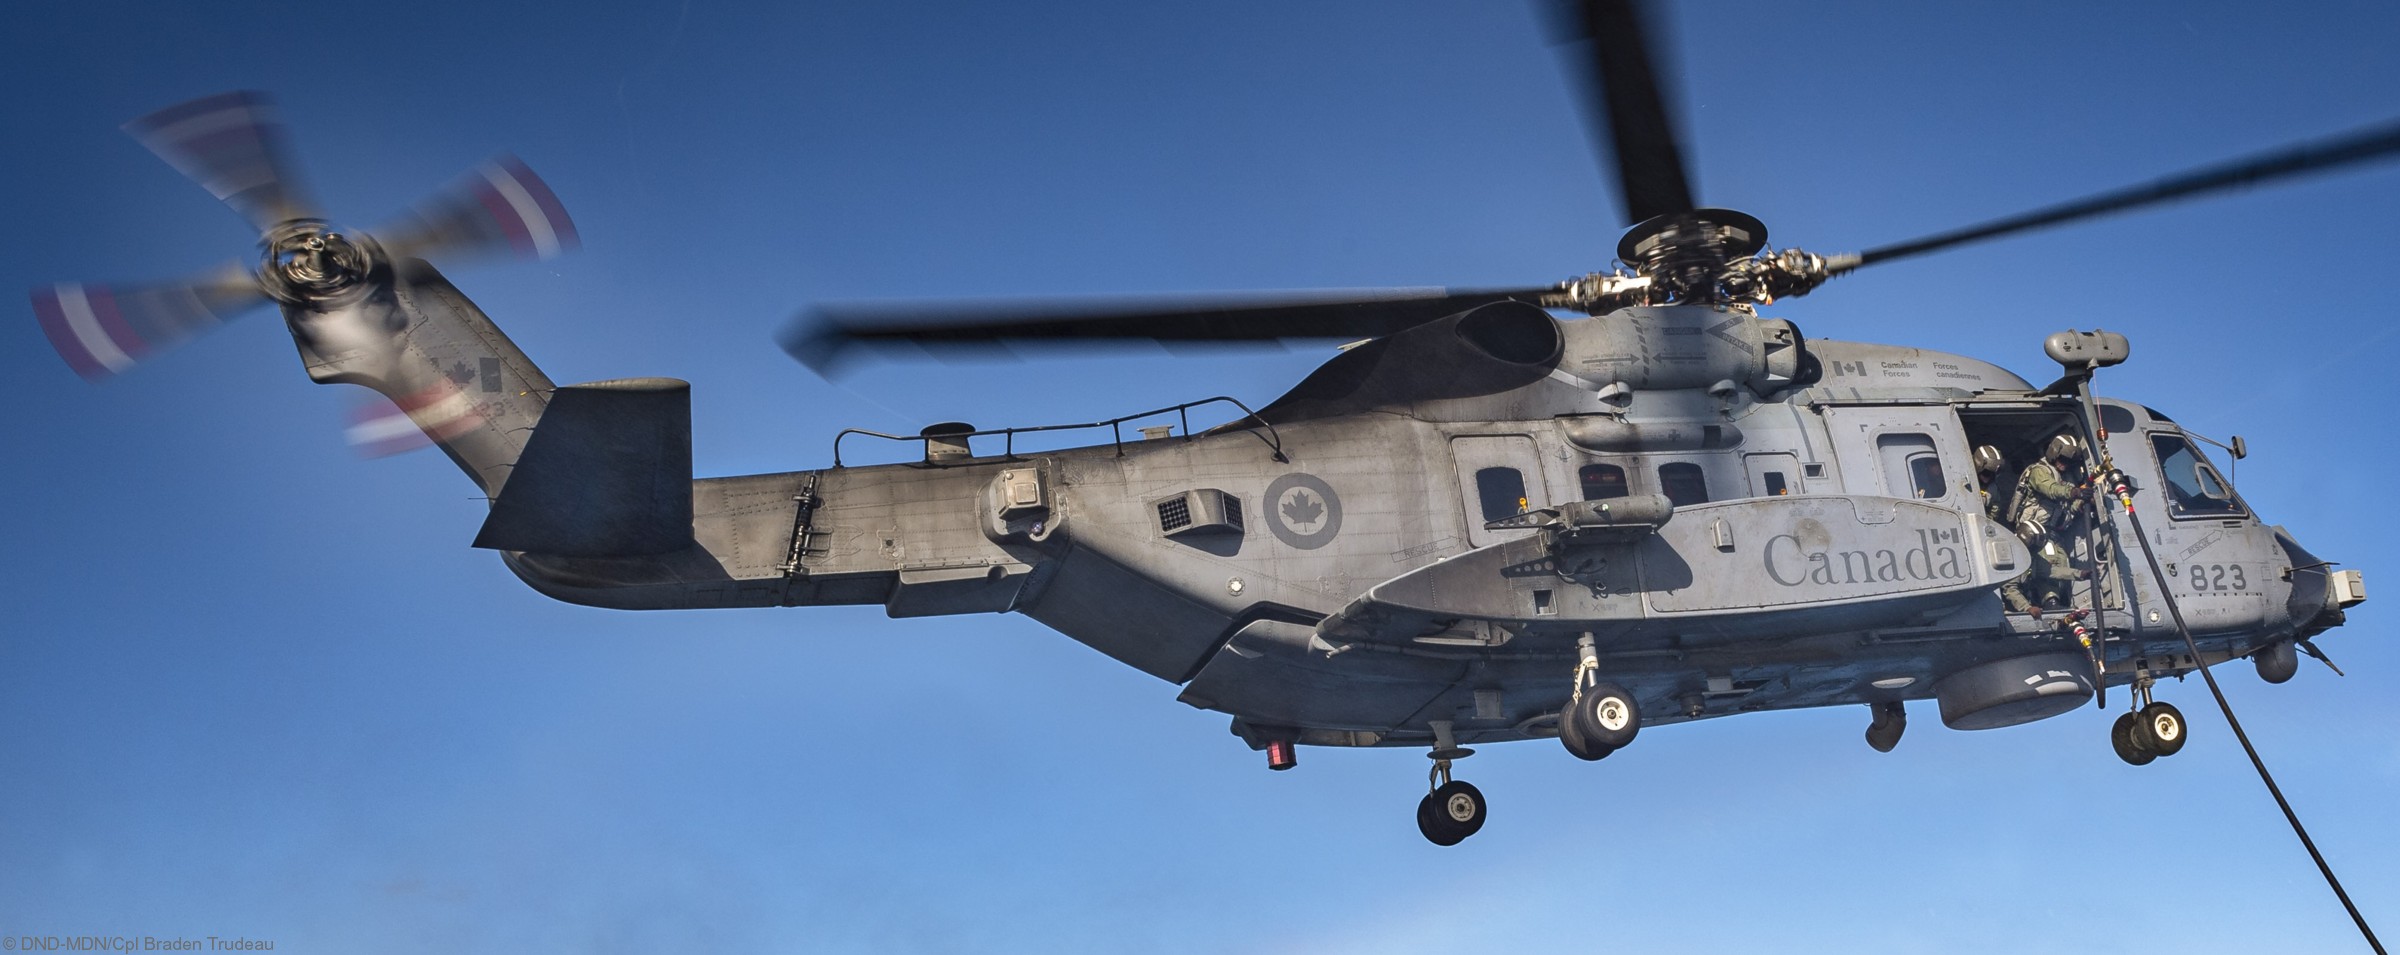 ch-148 cyclone naval helicopter royal canadian air force navy rcaf sikorsky hmcs 406 423 443 maritime squadron 29